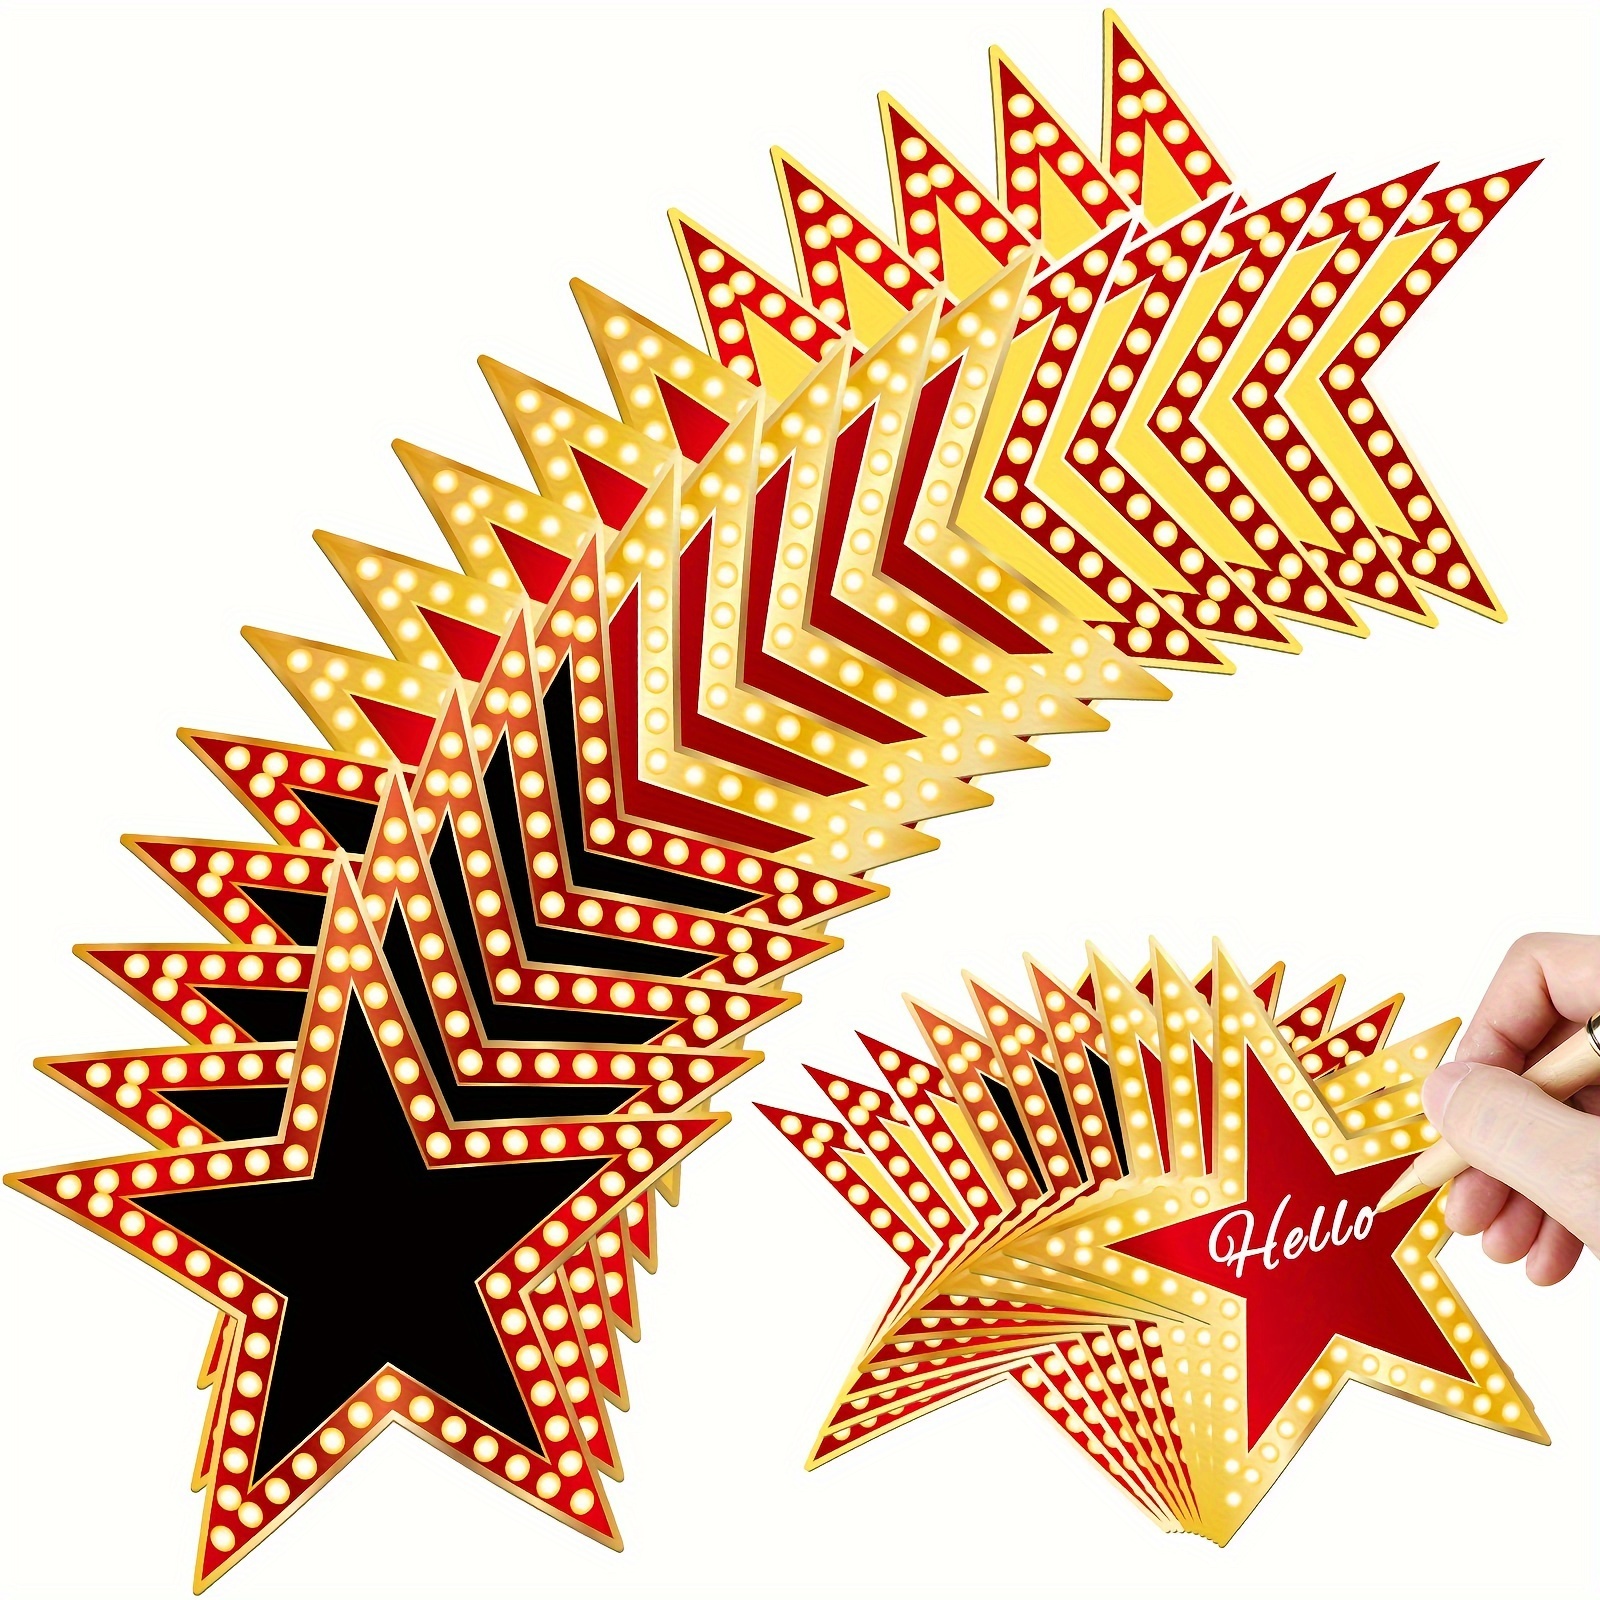 

18 Pieces Movie Star Cutouts, Red Carpet Awards Night Confetti, Birthday Party Supplies, Bachelor Party, Bar/bat Mitzvah Decorations, Paper, For Classroom Wall, Bulletin Board, No Electricity Needed